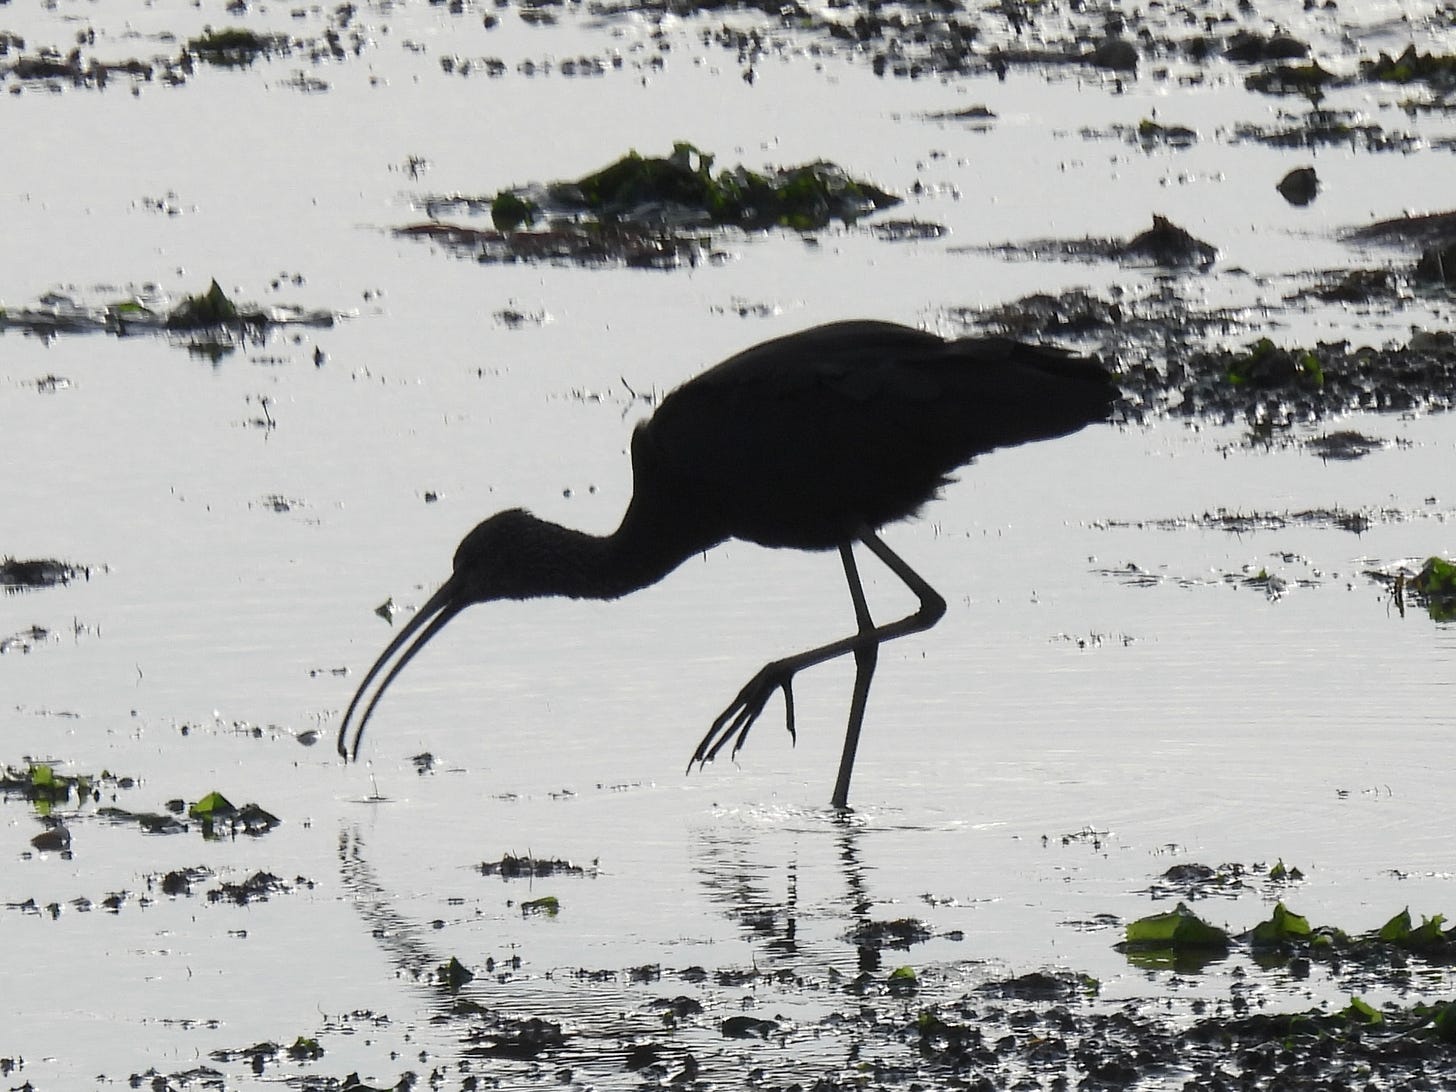 A silhouetted large bird feeding in shallow water on a beach, with seaweed in clumps scattered around. The bird has a long, downcurved bill and long legs. The bird is facing to the left of the frame